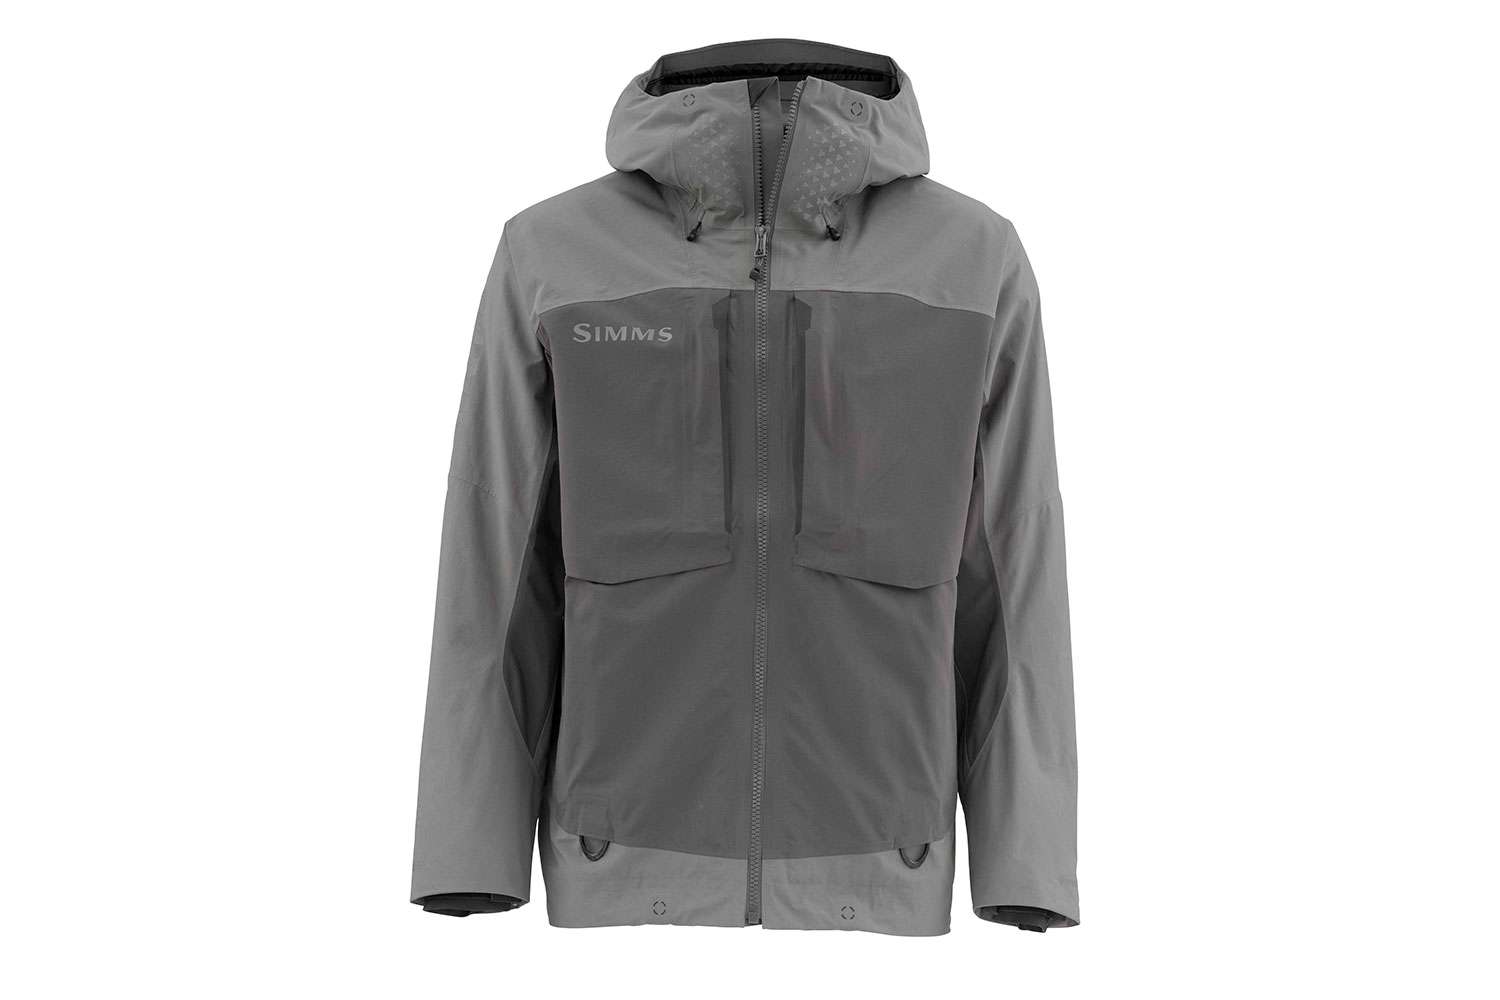 Simms Contender Insulated Jacket, $499.95